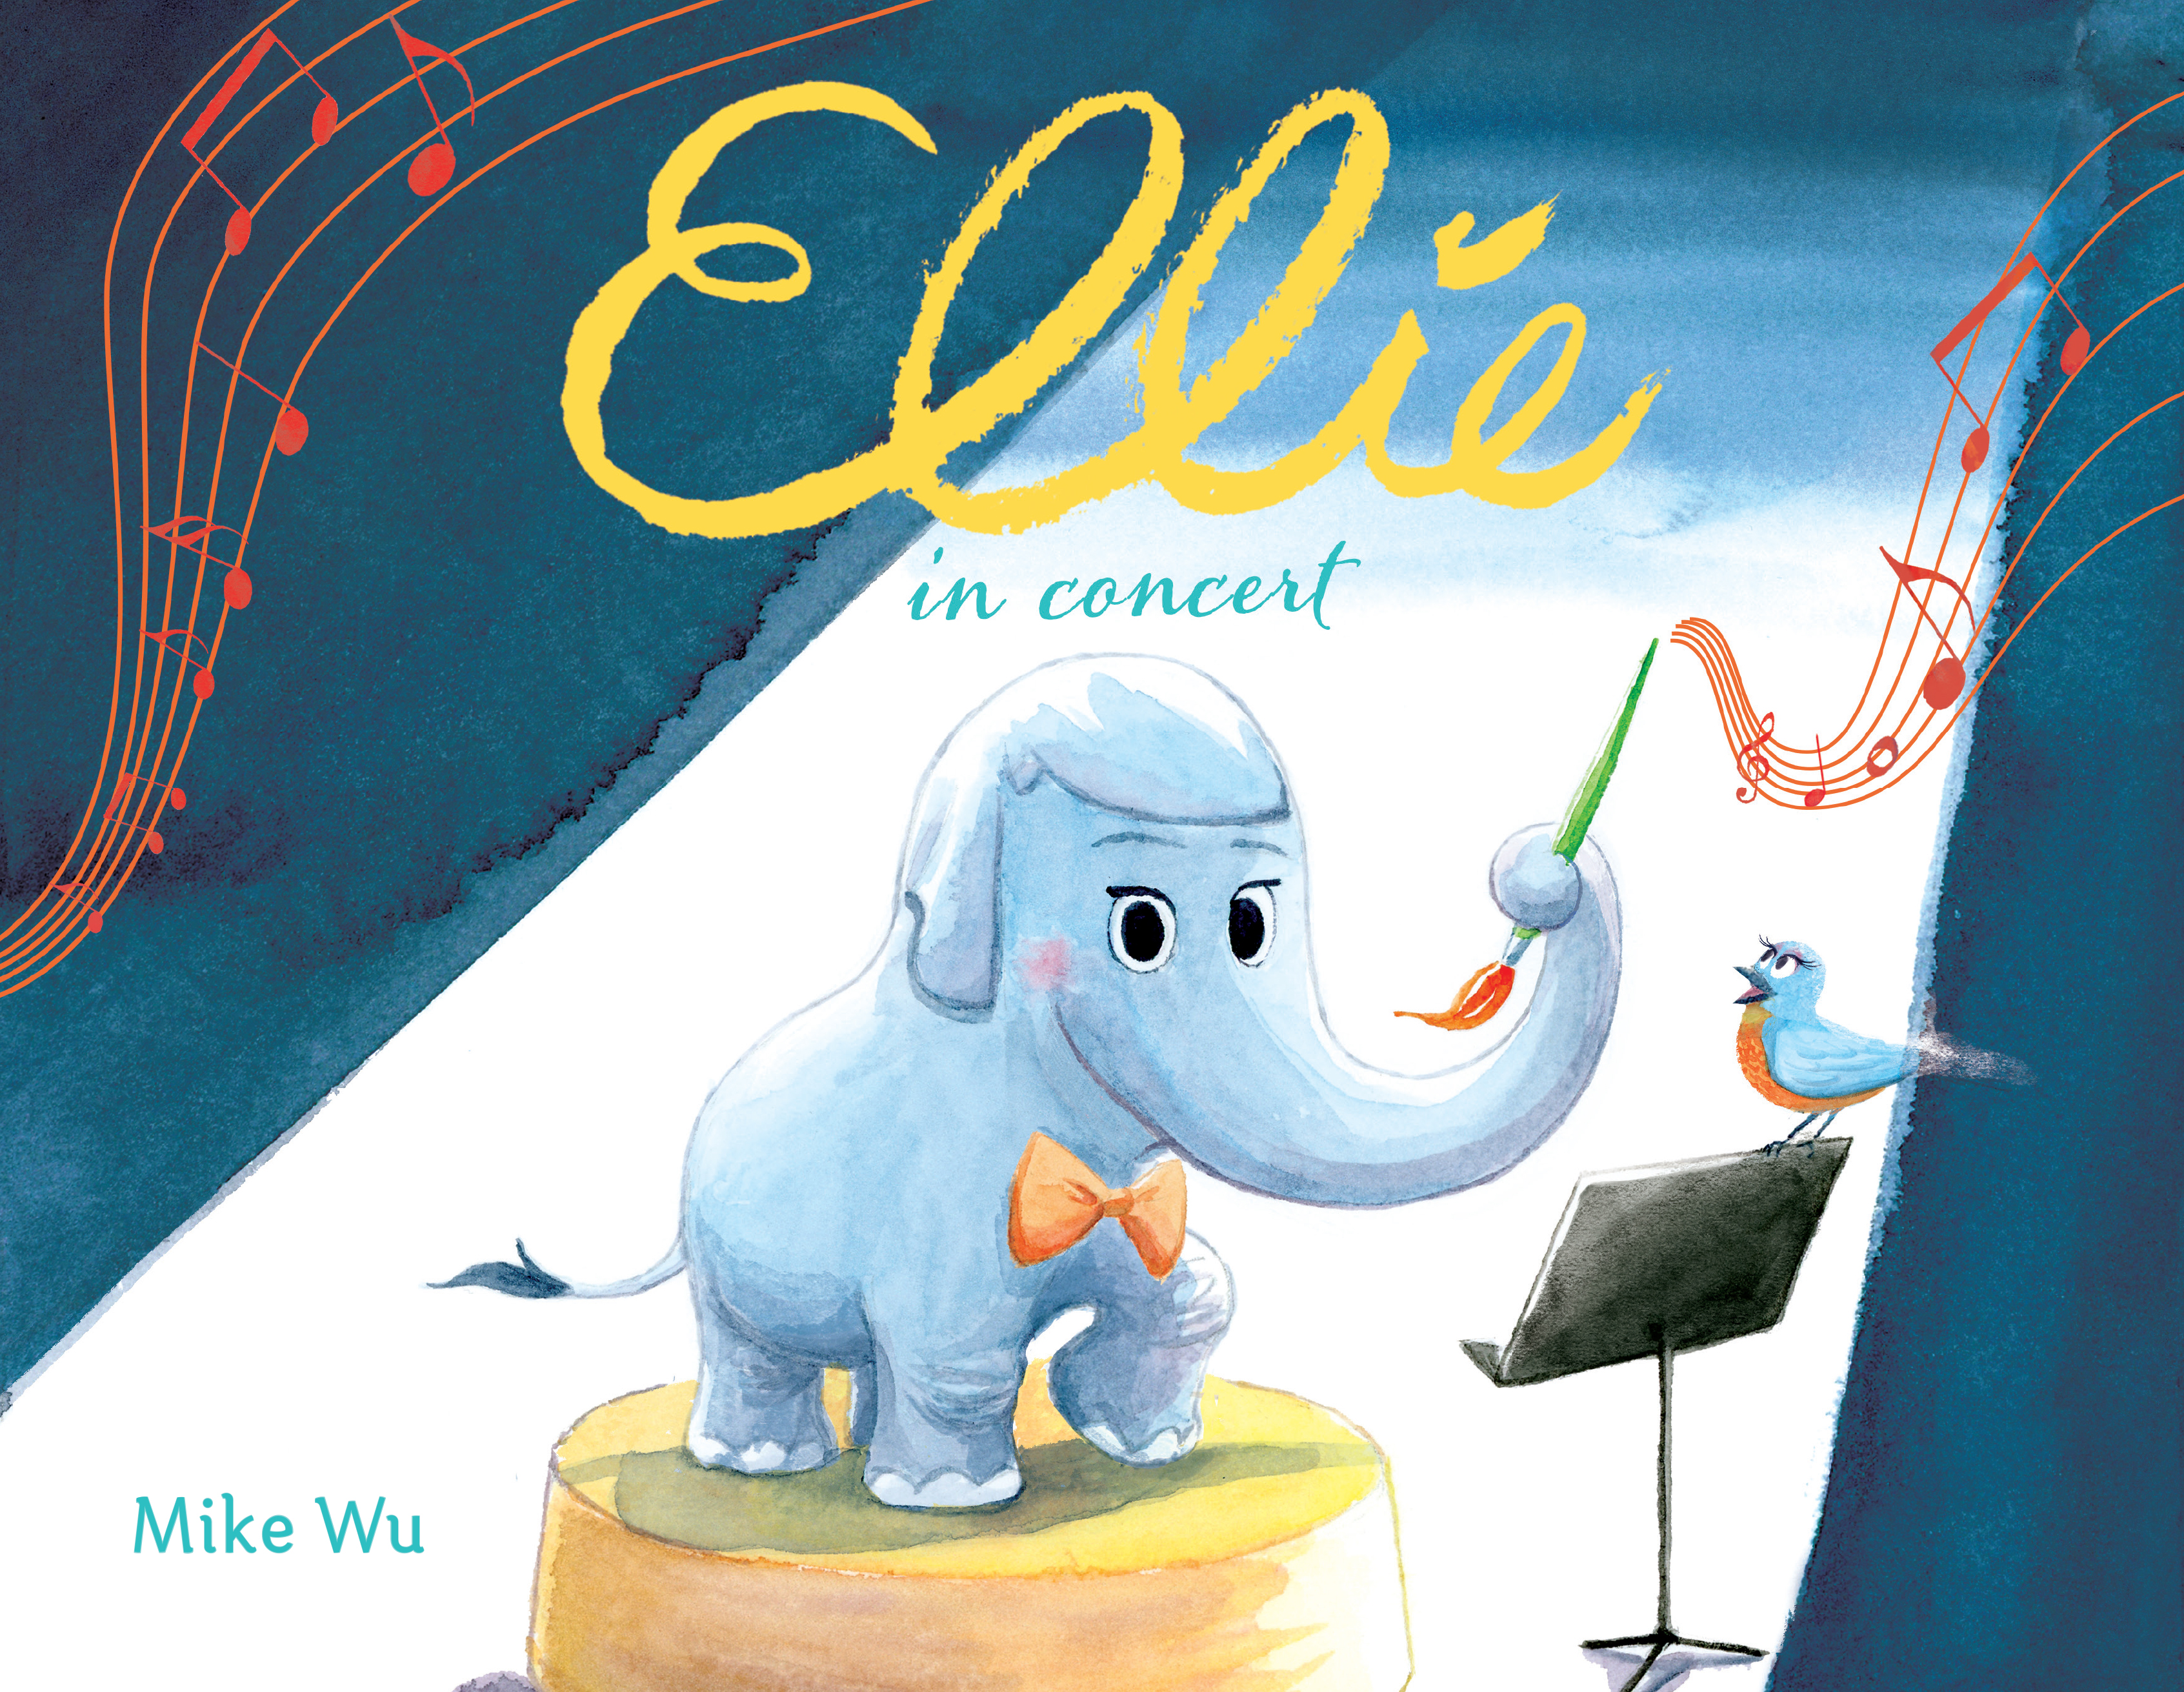 Sunday Story Time with Mike Wu (Author & Illustrator of Ellie)